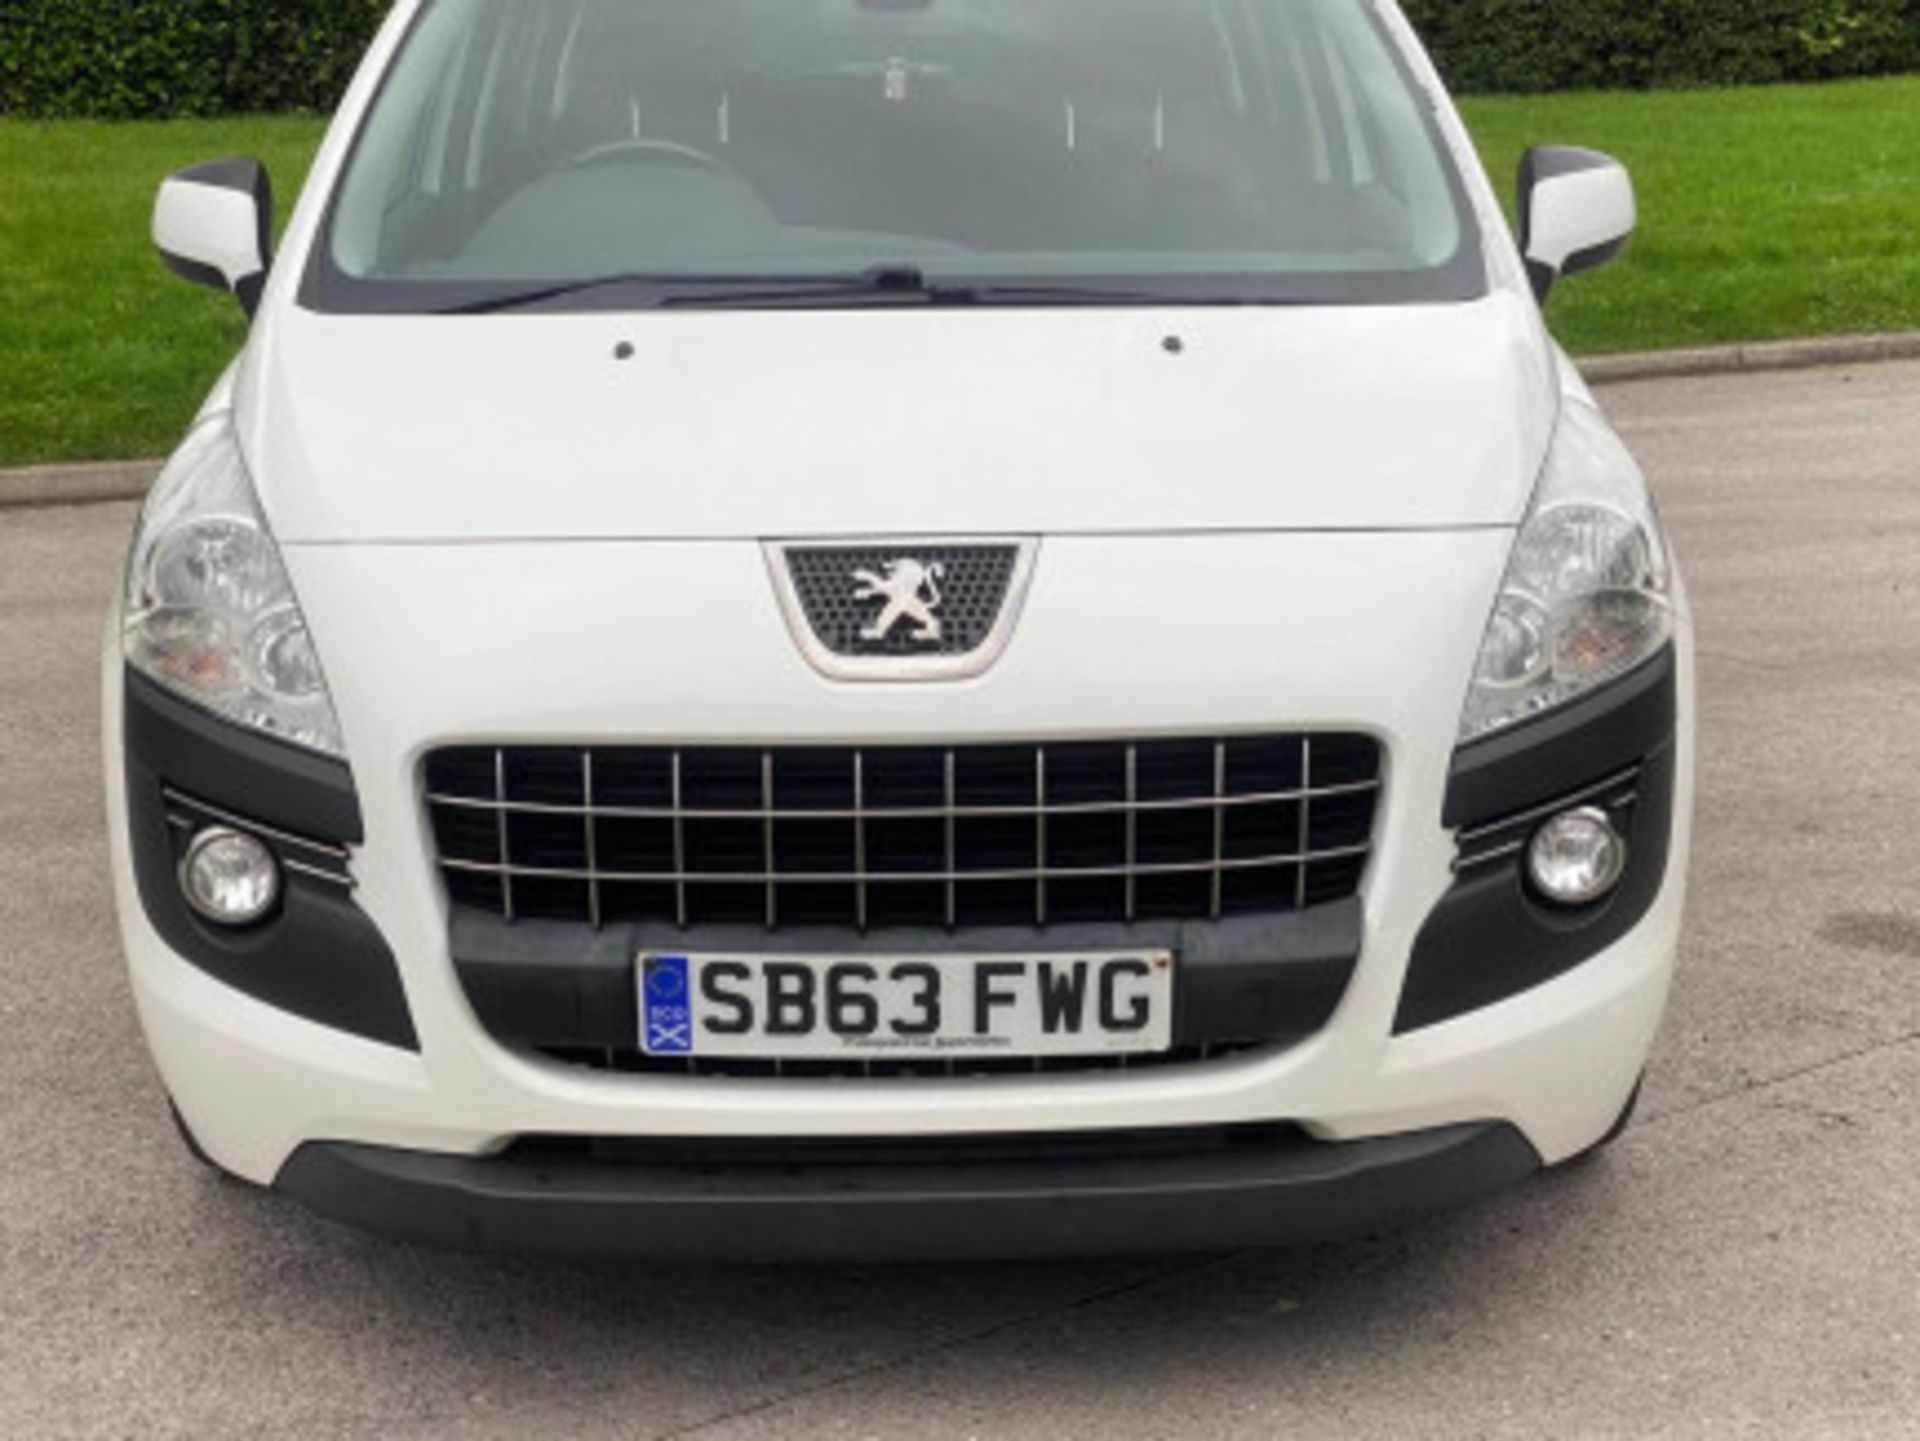 2013 PEUGEOT 3008 1.6 HDI ACTIVE EURO 5 5DR >>--NO VAT ON HAMMER--<< - Image 25 of 69